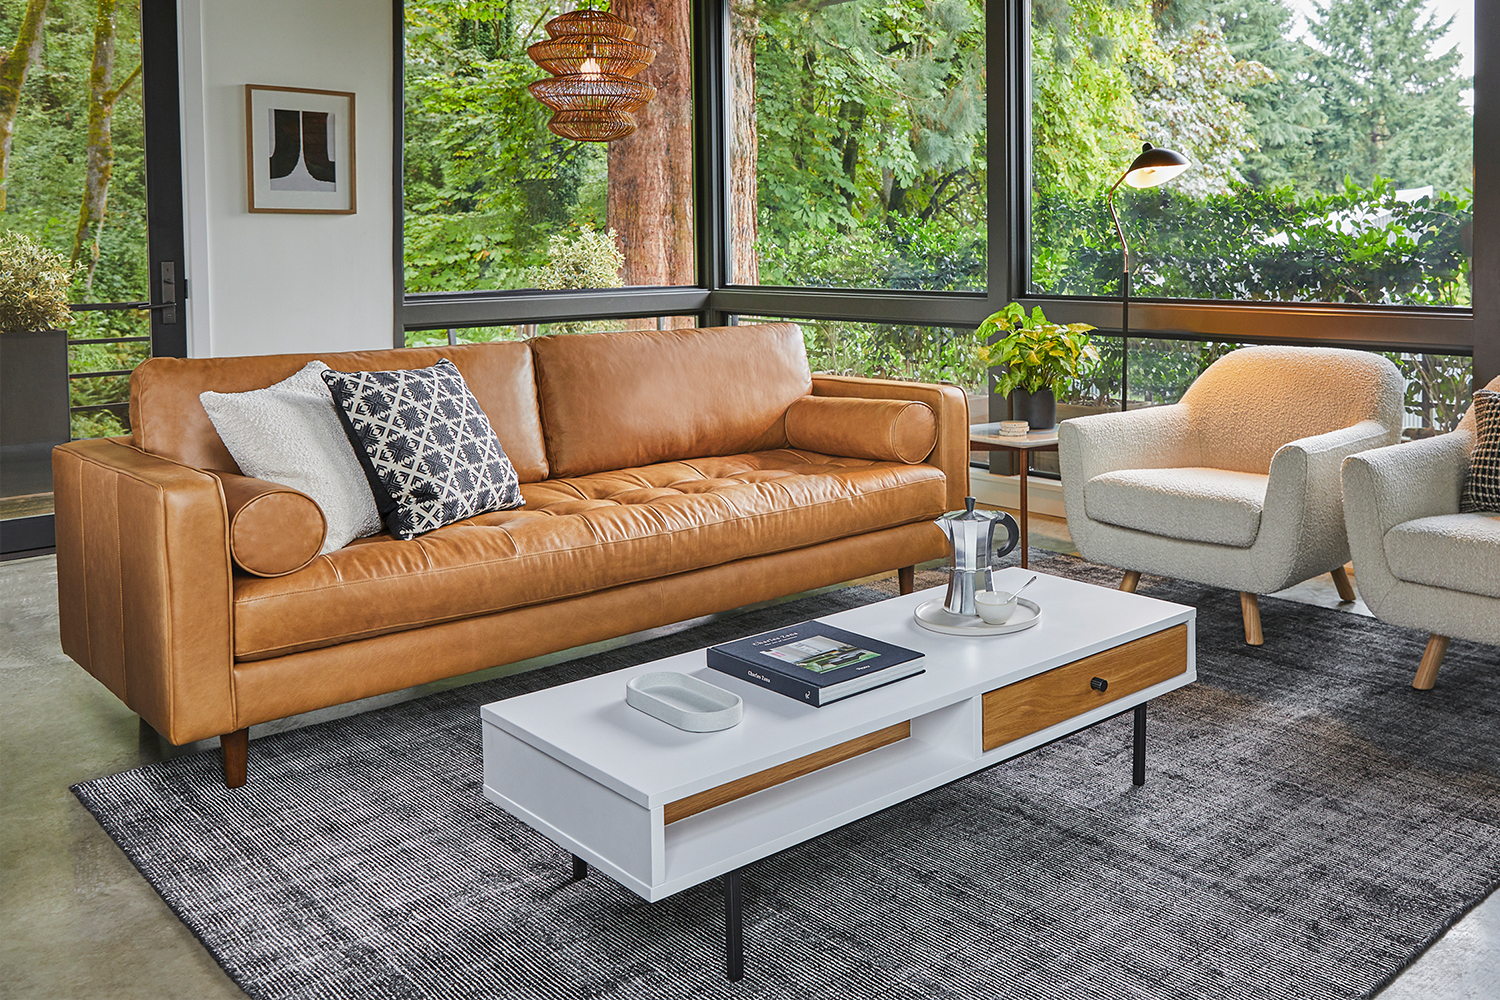 A leather Sven Sofa from Article. The couch is pictured here next to a coffee table and armchair.